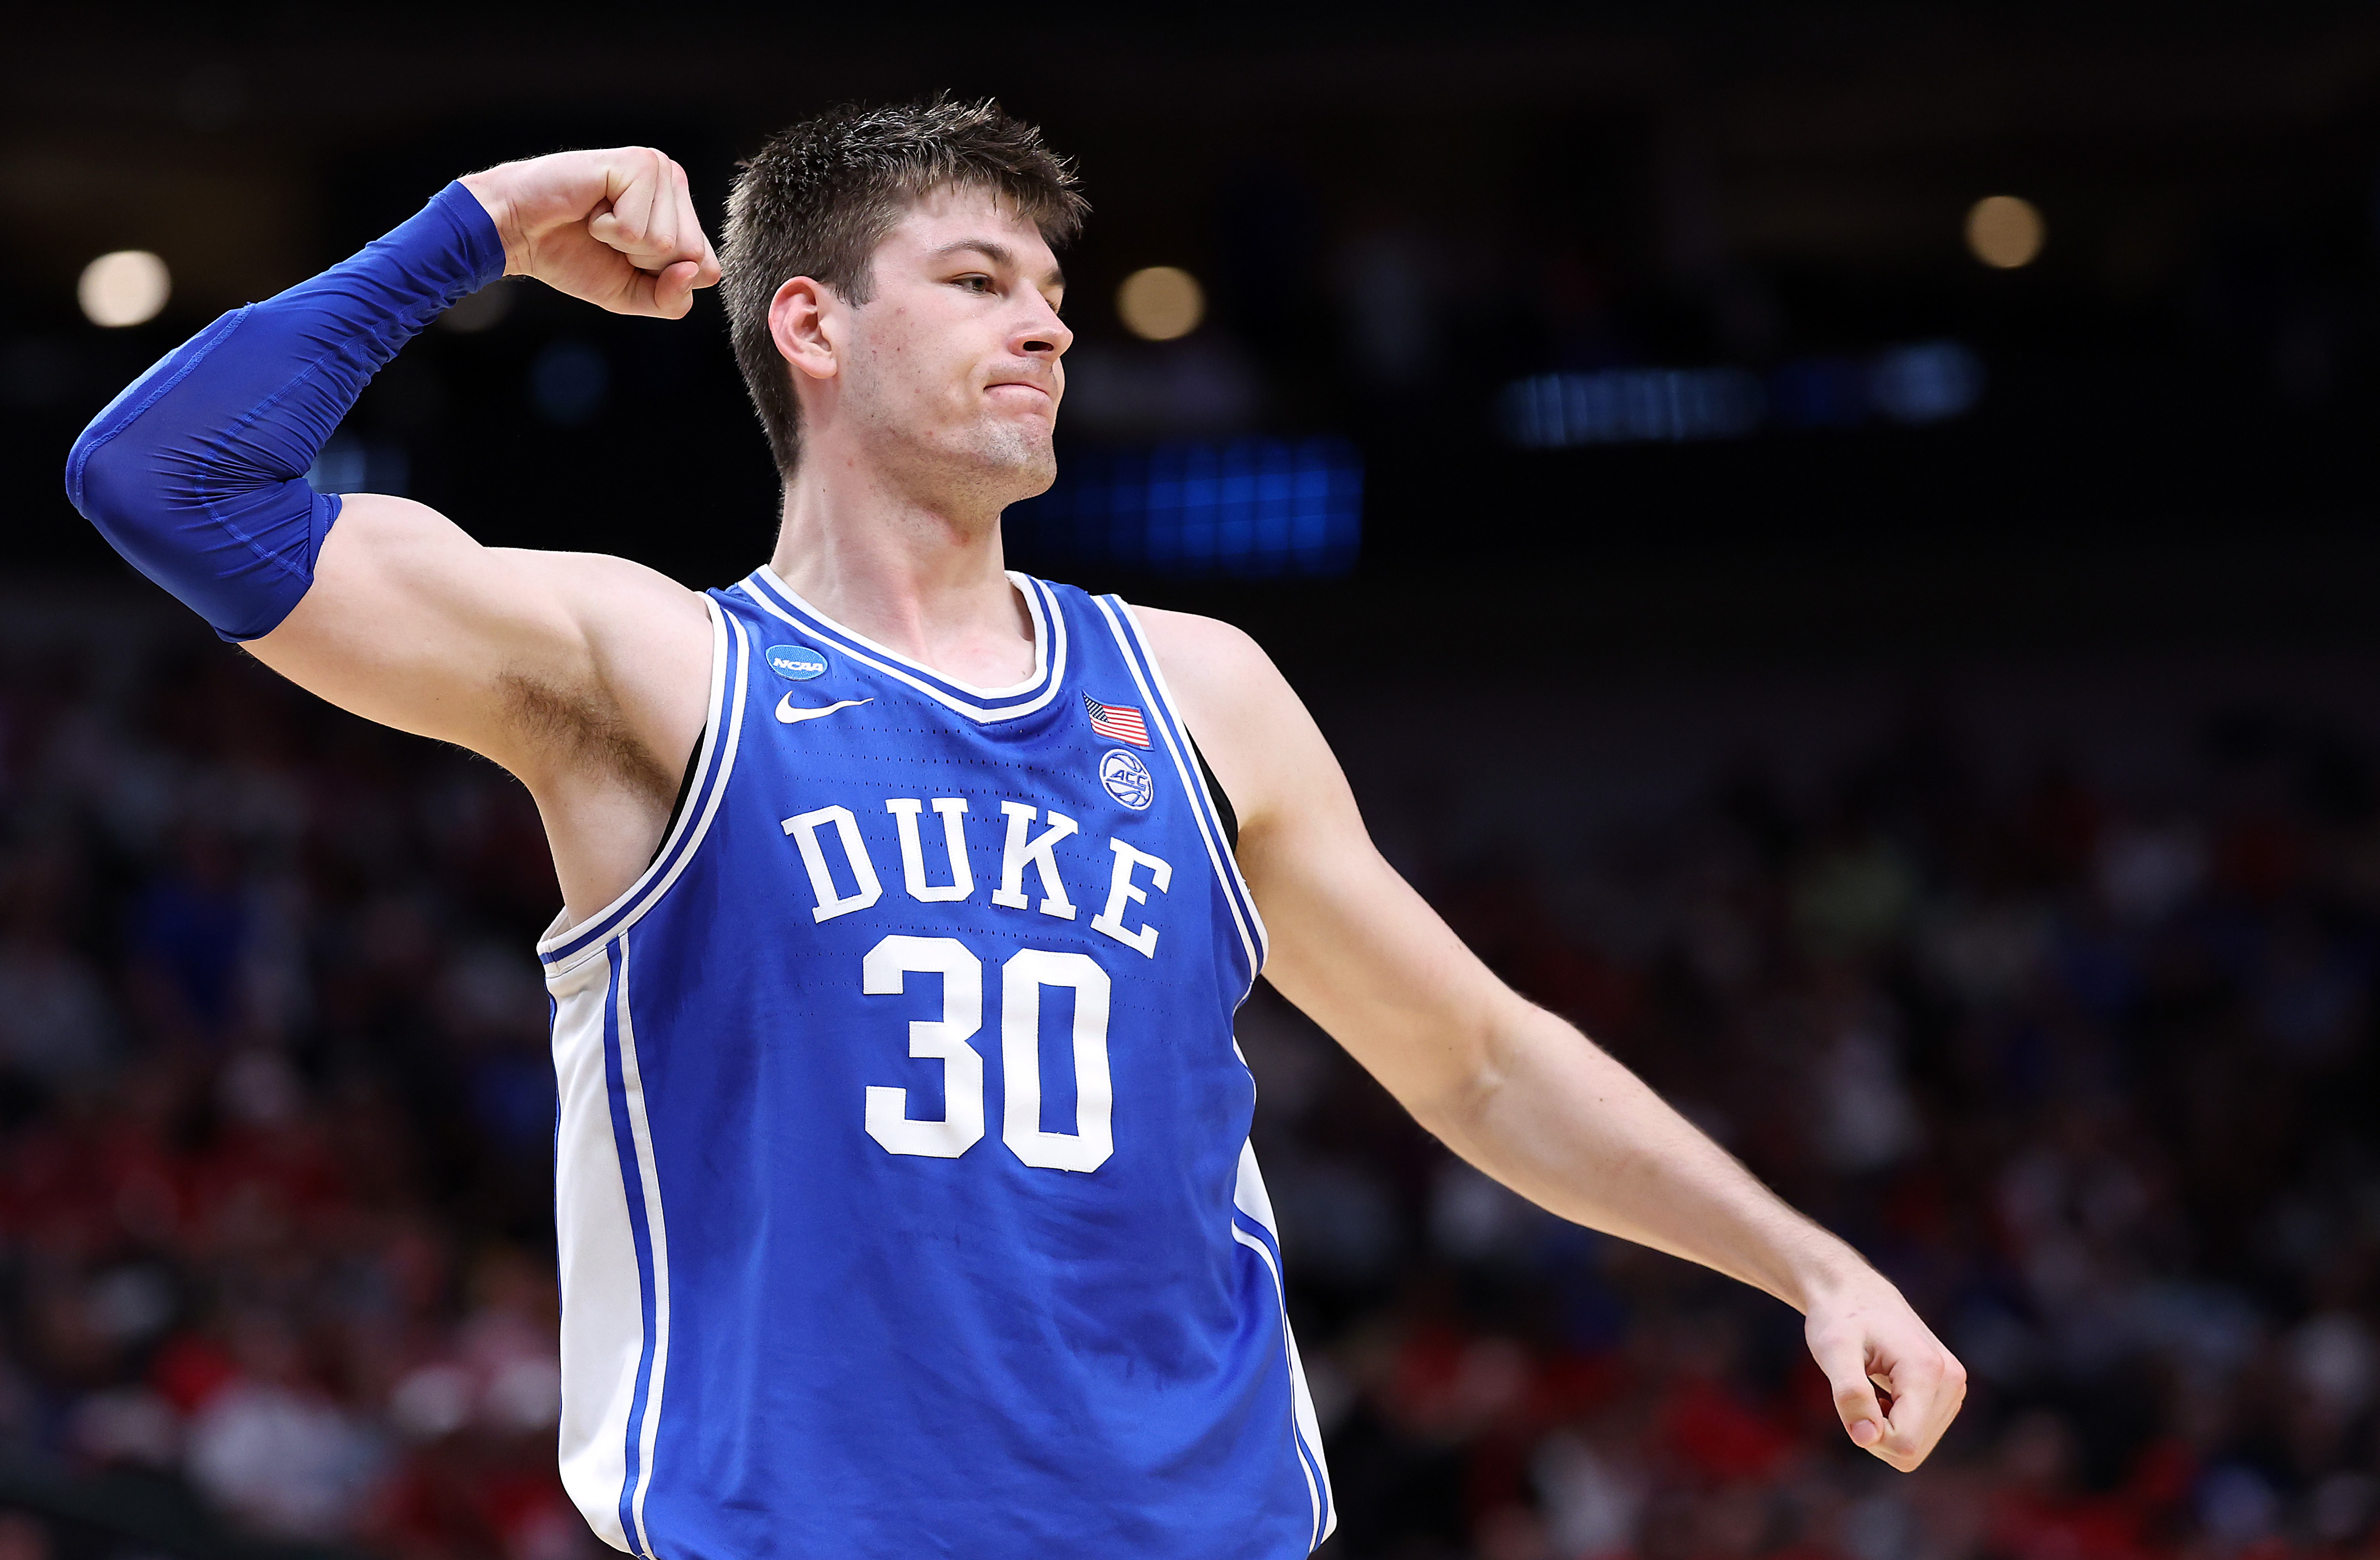 Kyle Filipowski of the Duke Blue Devils reacts after scoring during the second half of the Sweet 16 round of the NCAA Men's Basketball Tournament against the Houston Cougars at American Airlines Center on March 29, 2024 in Dallas, Texas. (Patrick Smith, Getty Images)